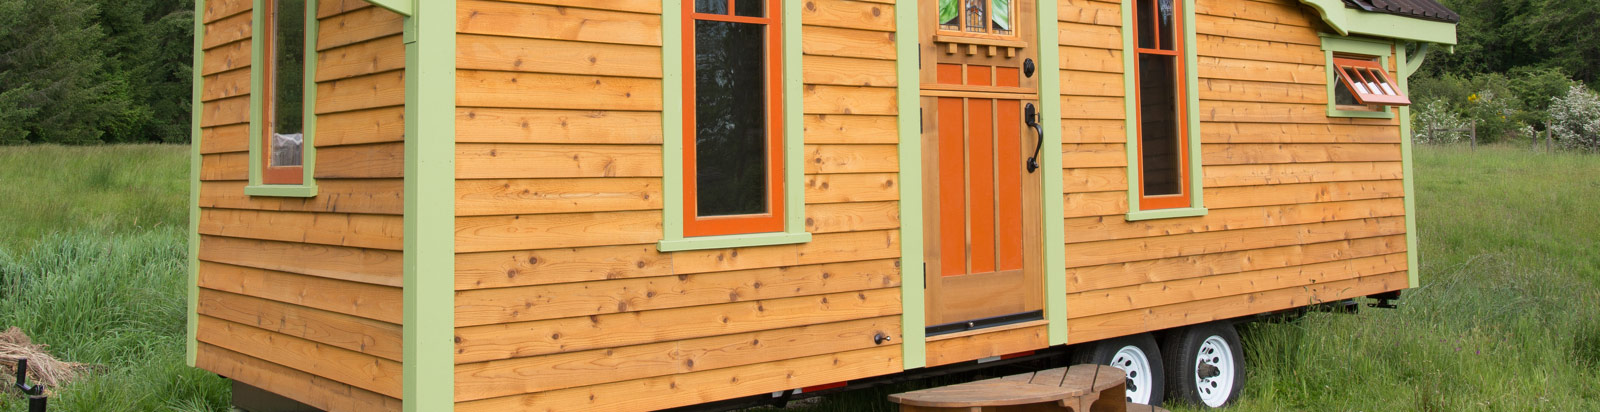 Tiny wooden house on wheels